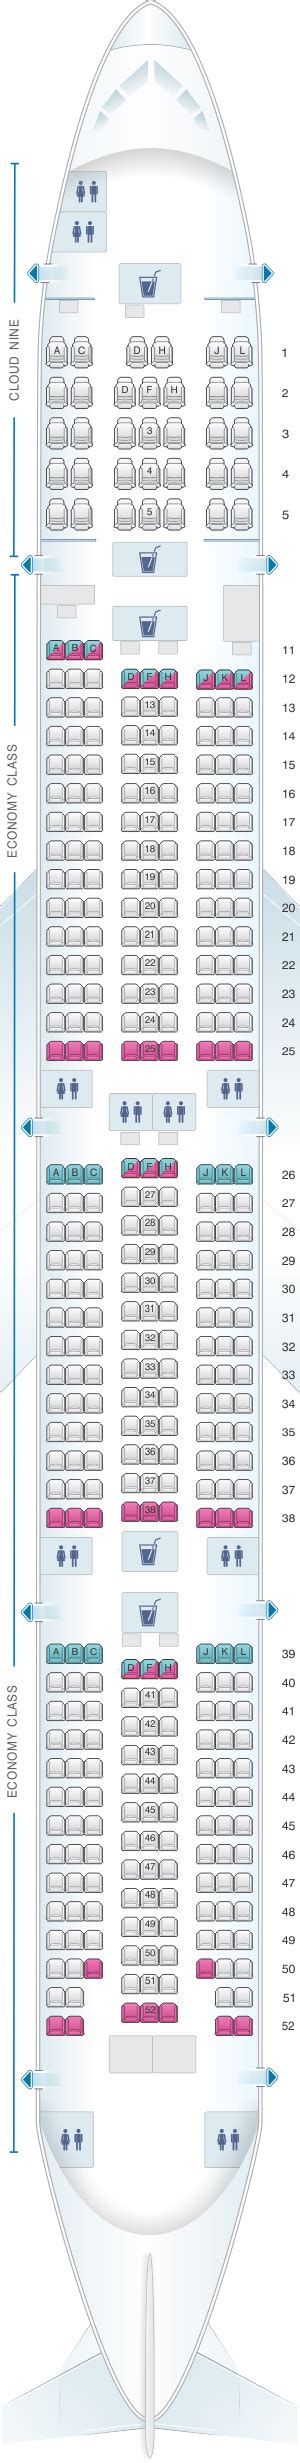 Seat Map Ethiopian Boeing B Er Best Airplane Emirates Boeing Chart Map Suite Planes